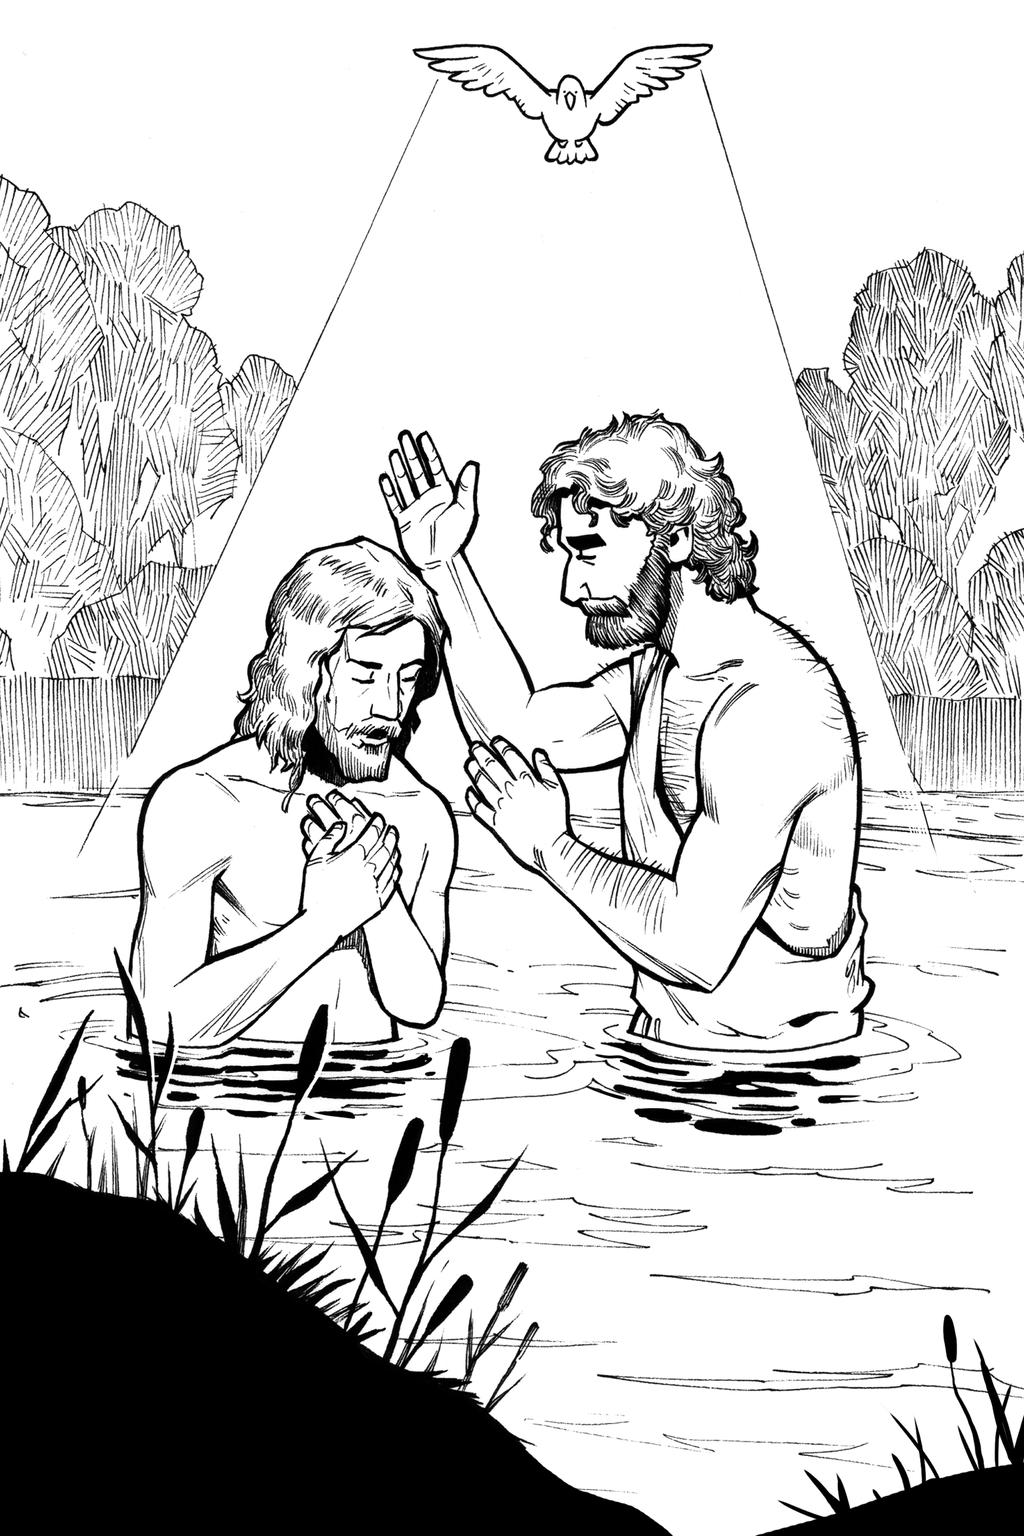 Let s Color! Name: [Coloring page to come] Include a simple line drawing of Jesus being baptized, with a dove coming down from heaven.